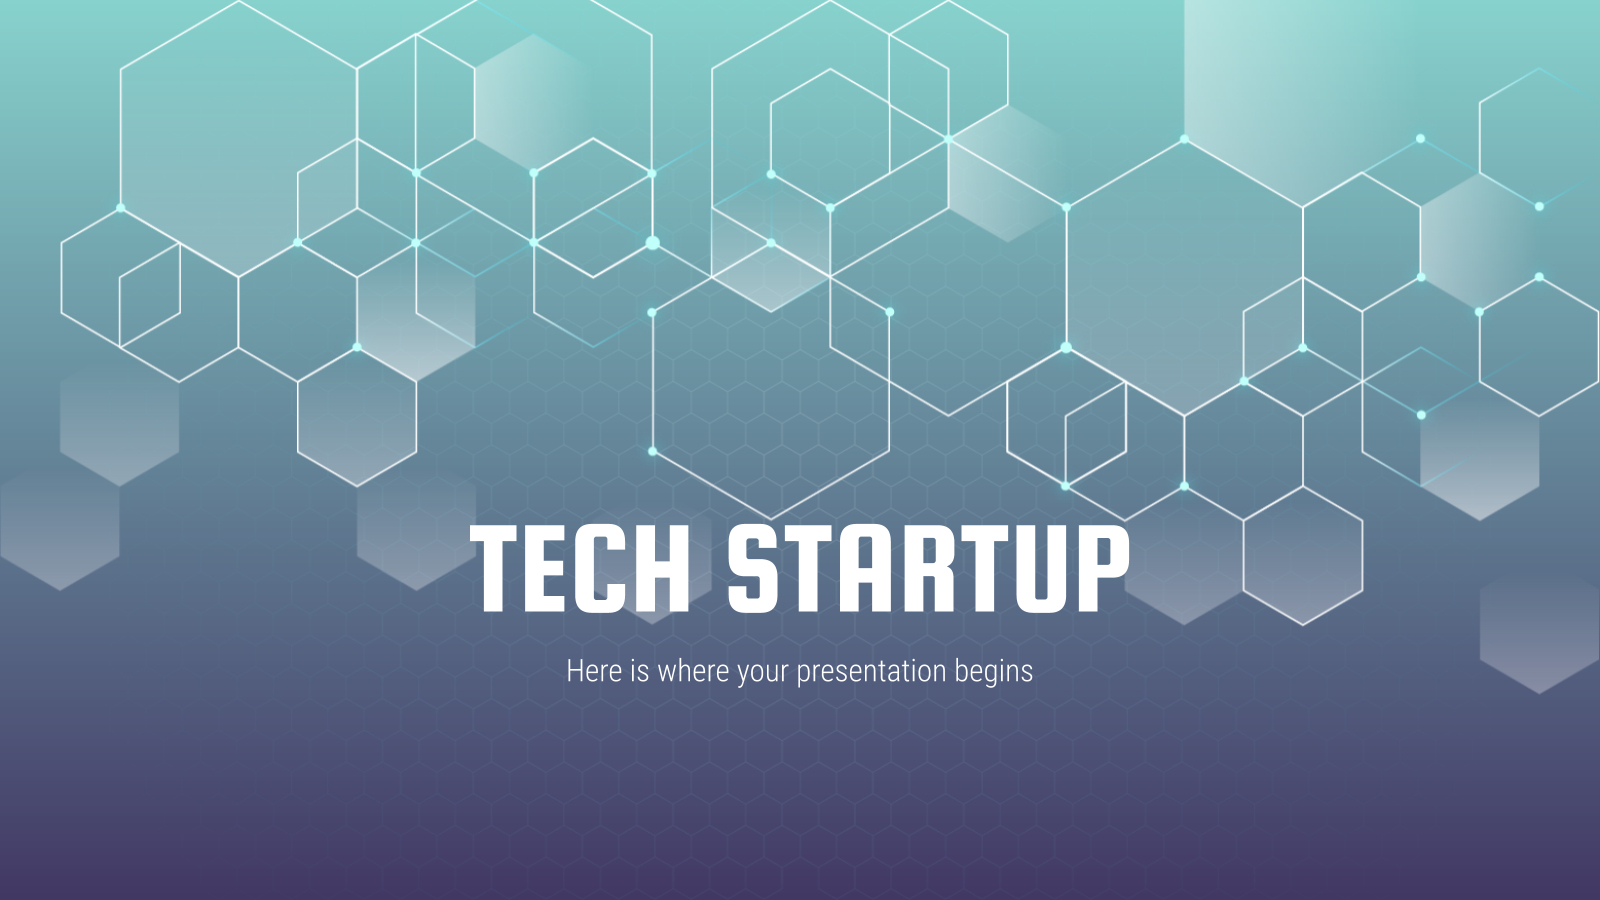 Tech Startup Theme For Google Slides And Powerpoint Intended For Powerpoint Templates For Technology Presentations